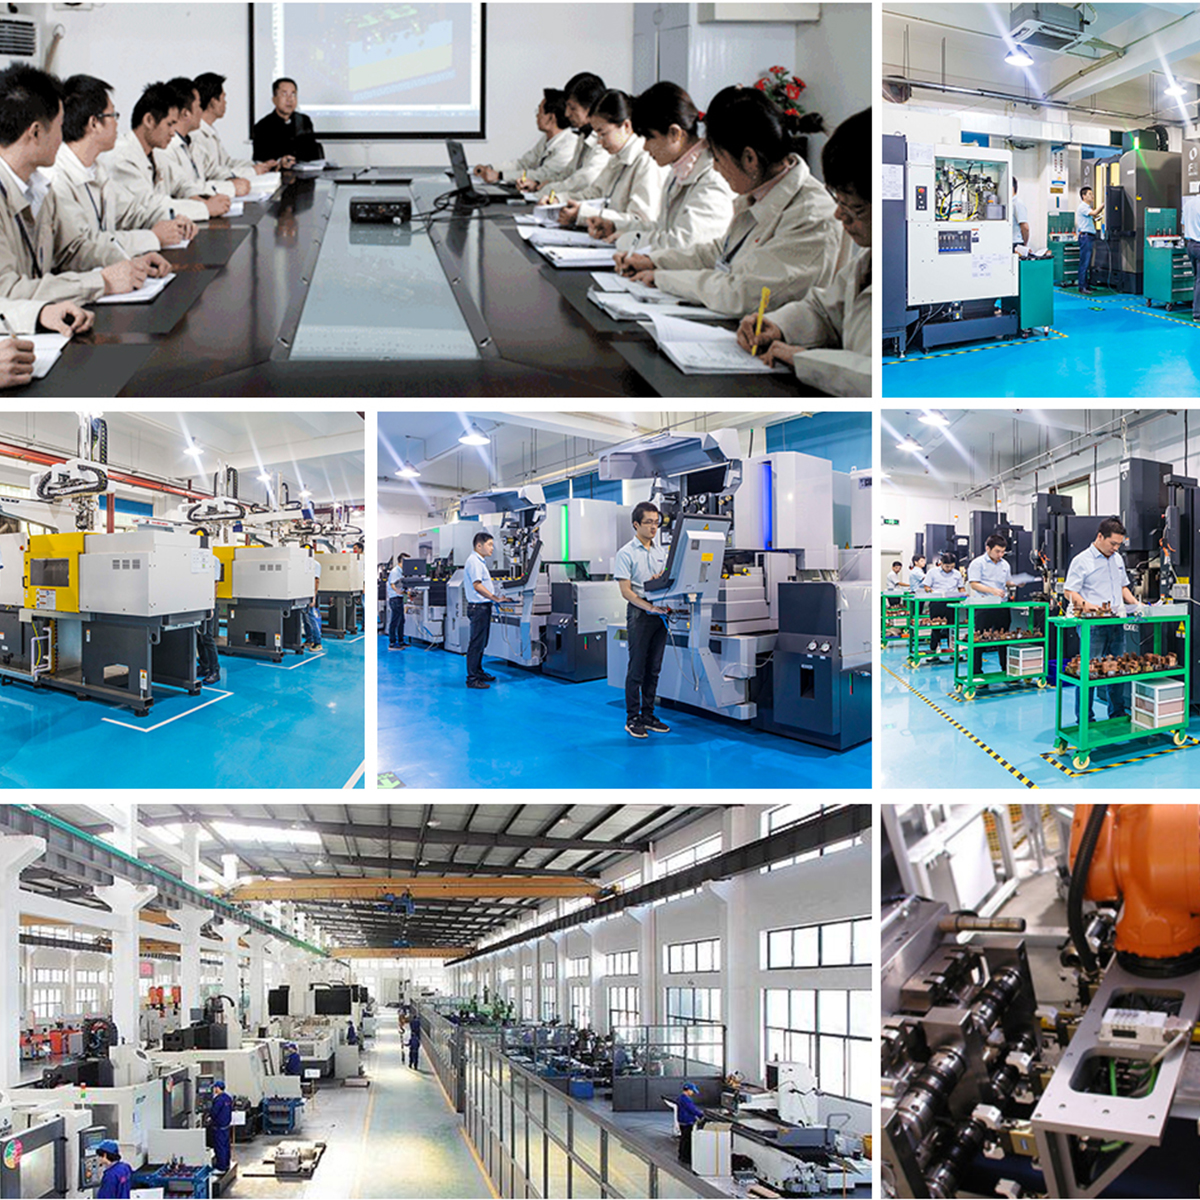 China mold manufacturer,China mold manufacturing,China mold factory,plastic injection mold,plastic injection mold manufacturer,plastic mold manufacturer